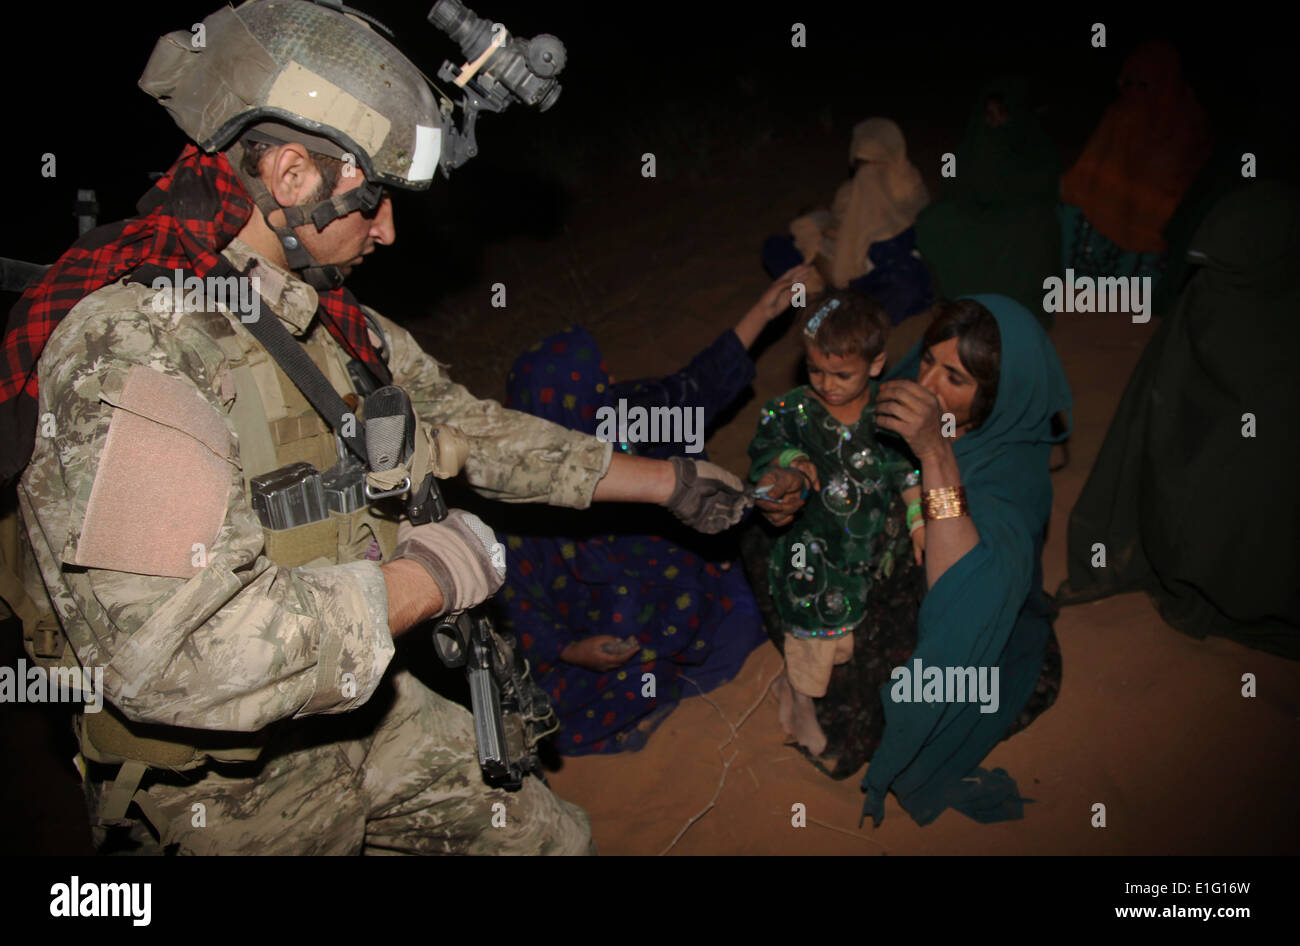 Afghan National Army soldiers give a child candy during a a nighttime search for Taliban insurgents with US Army soldiers August 8, 2013 in Zharay district, Kandahar province, Afghanistan. Stock Photo